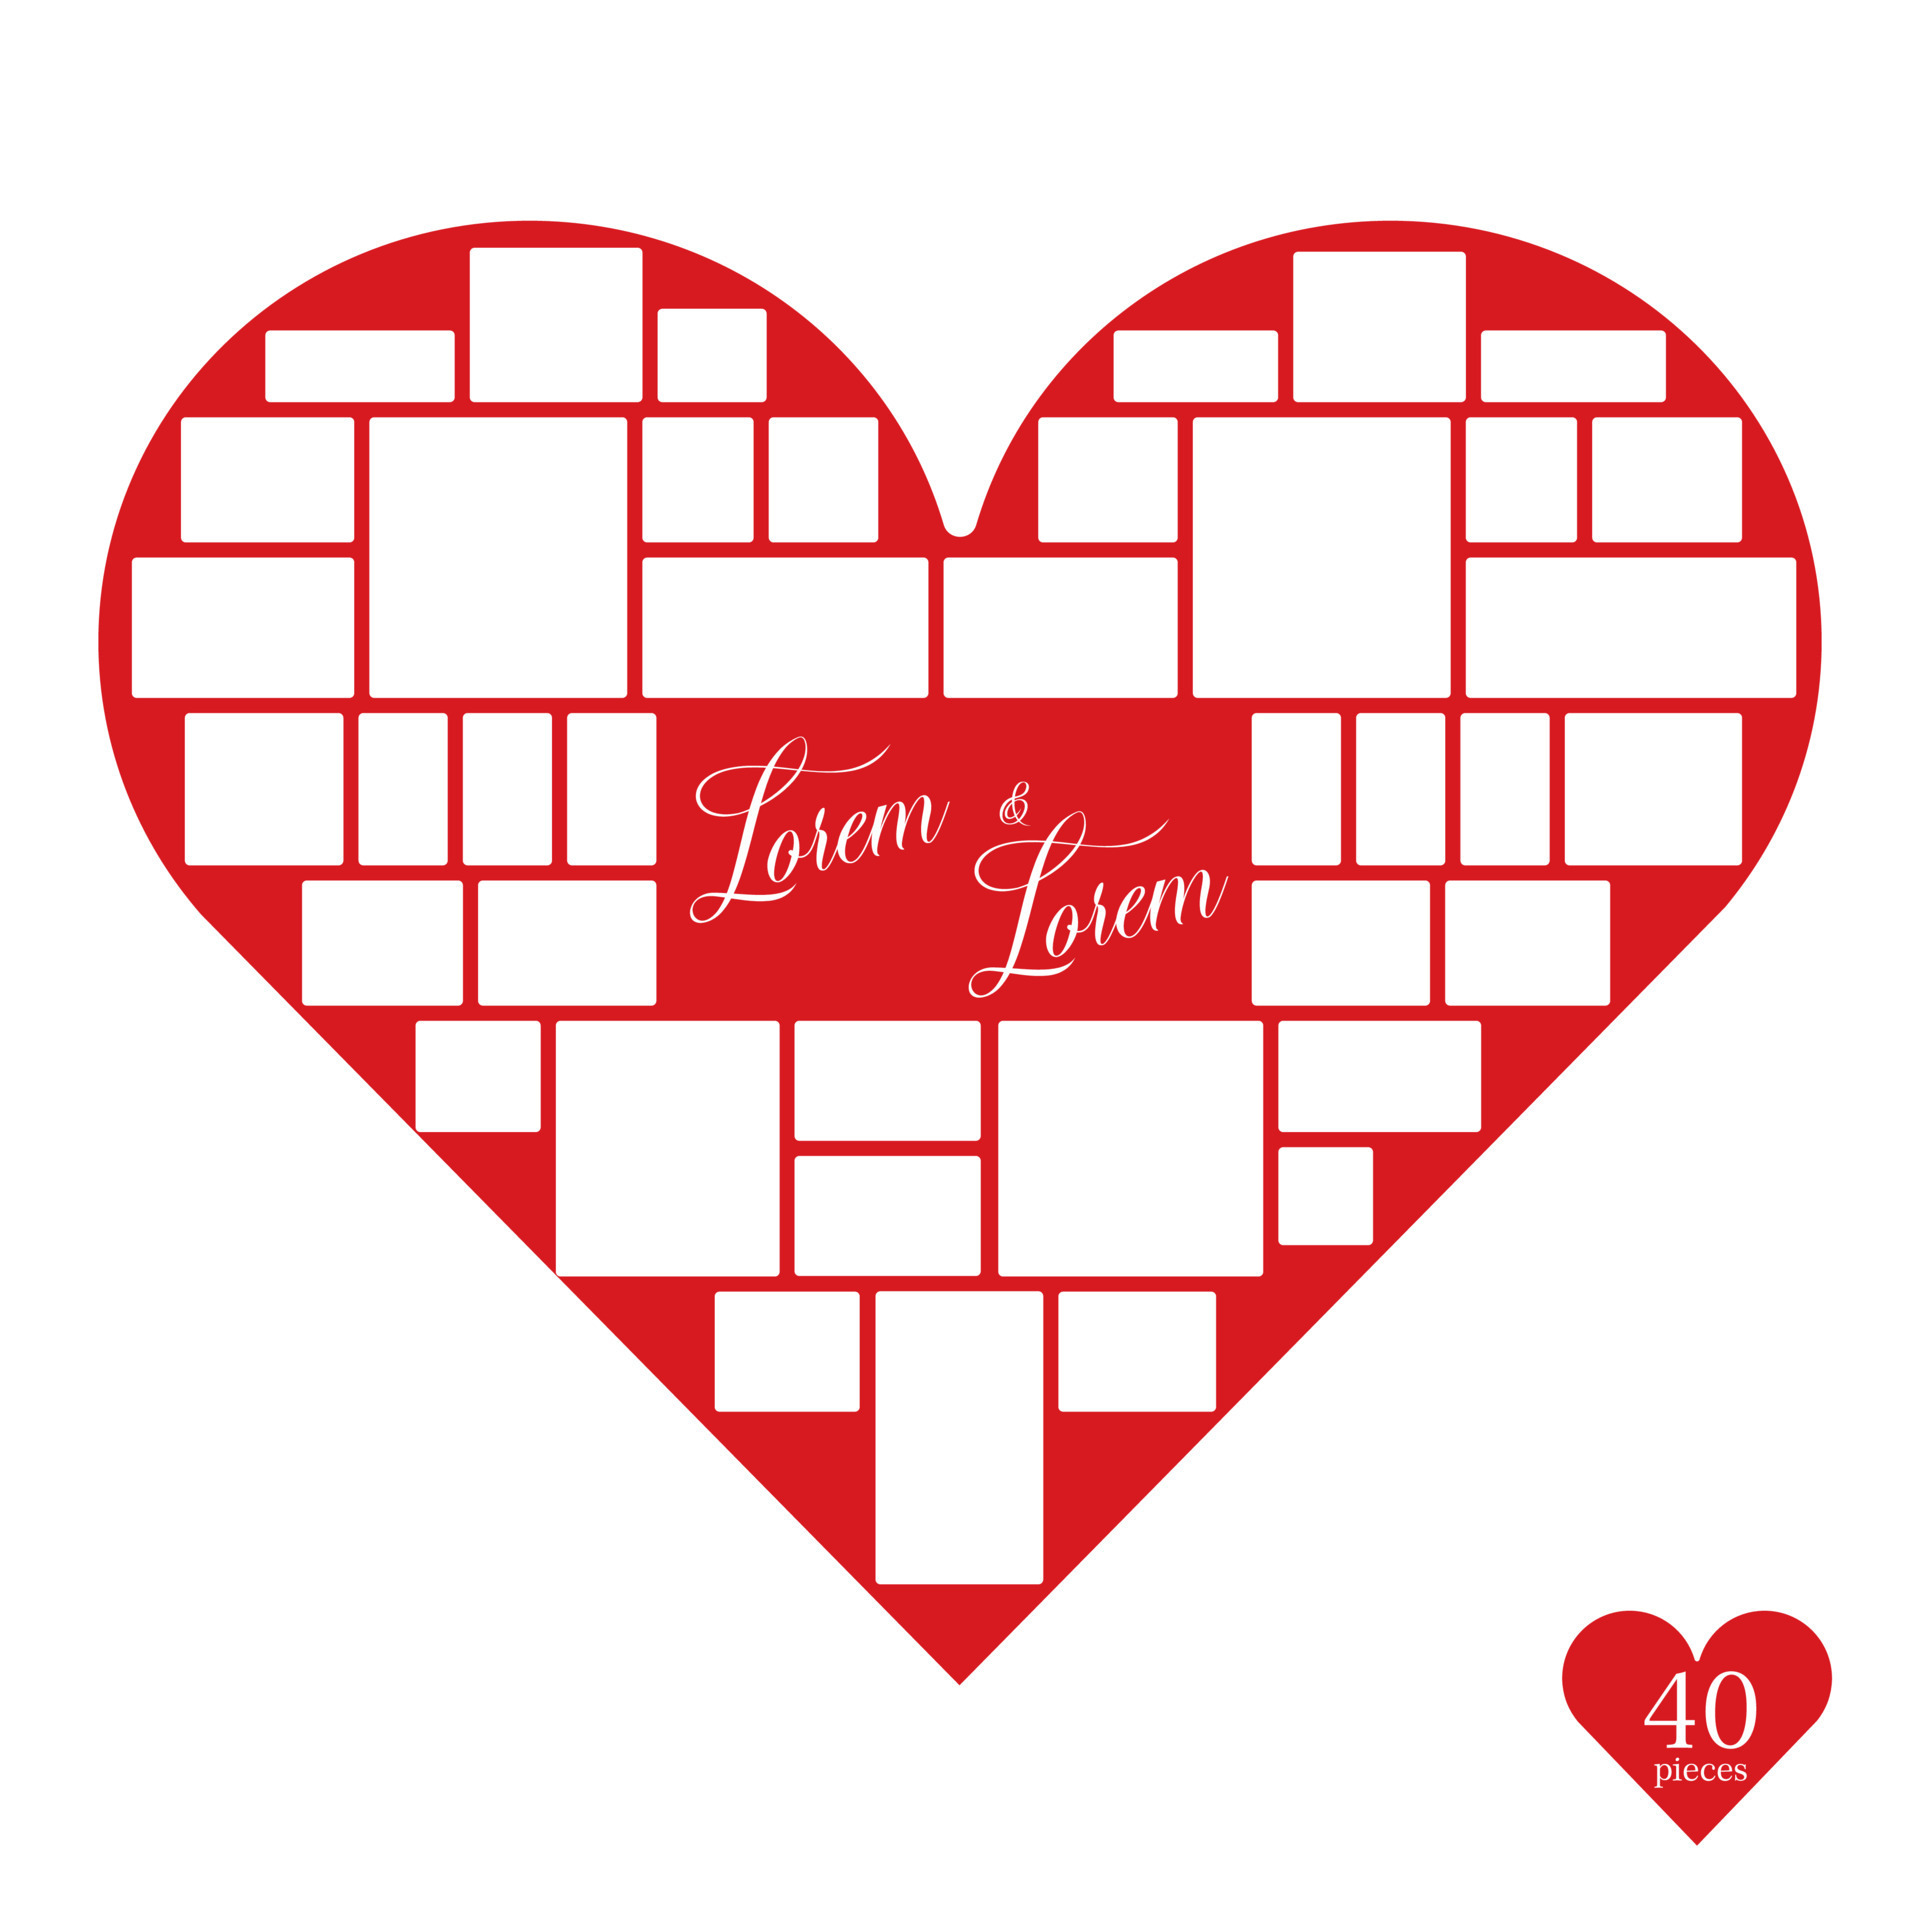 Postbode Vulkaan Kort leven Photo Collage Heart Vector Art, Icons, and Graphics for Free Download